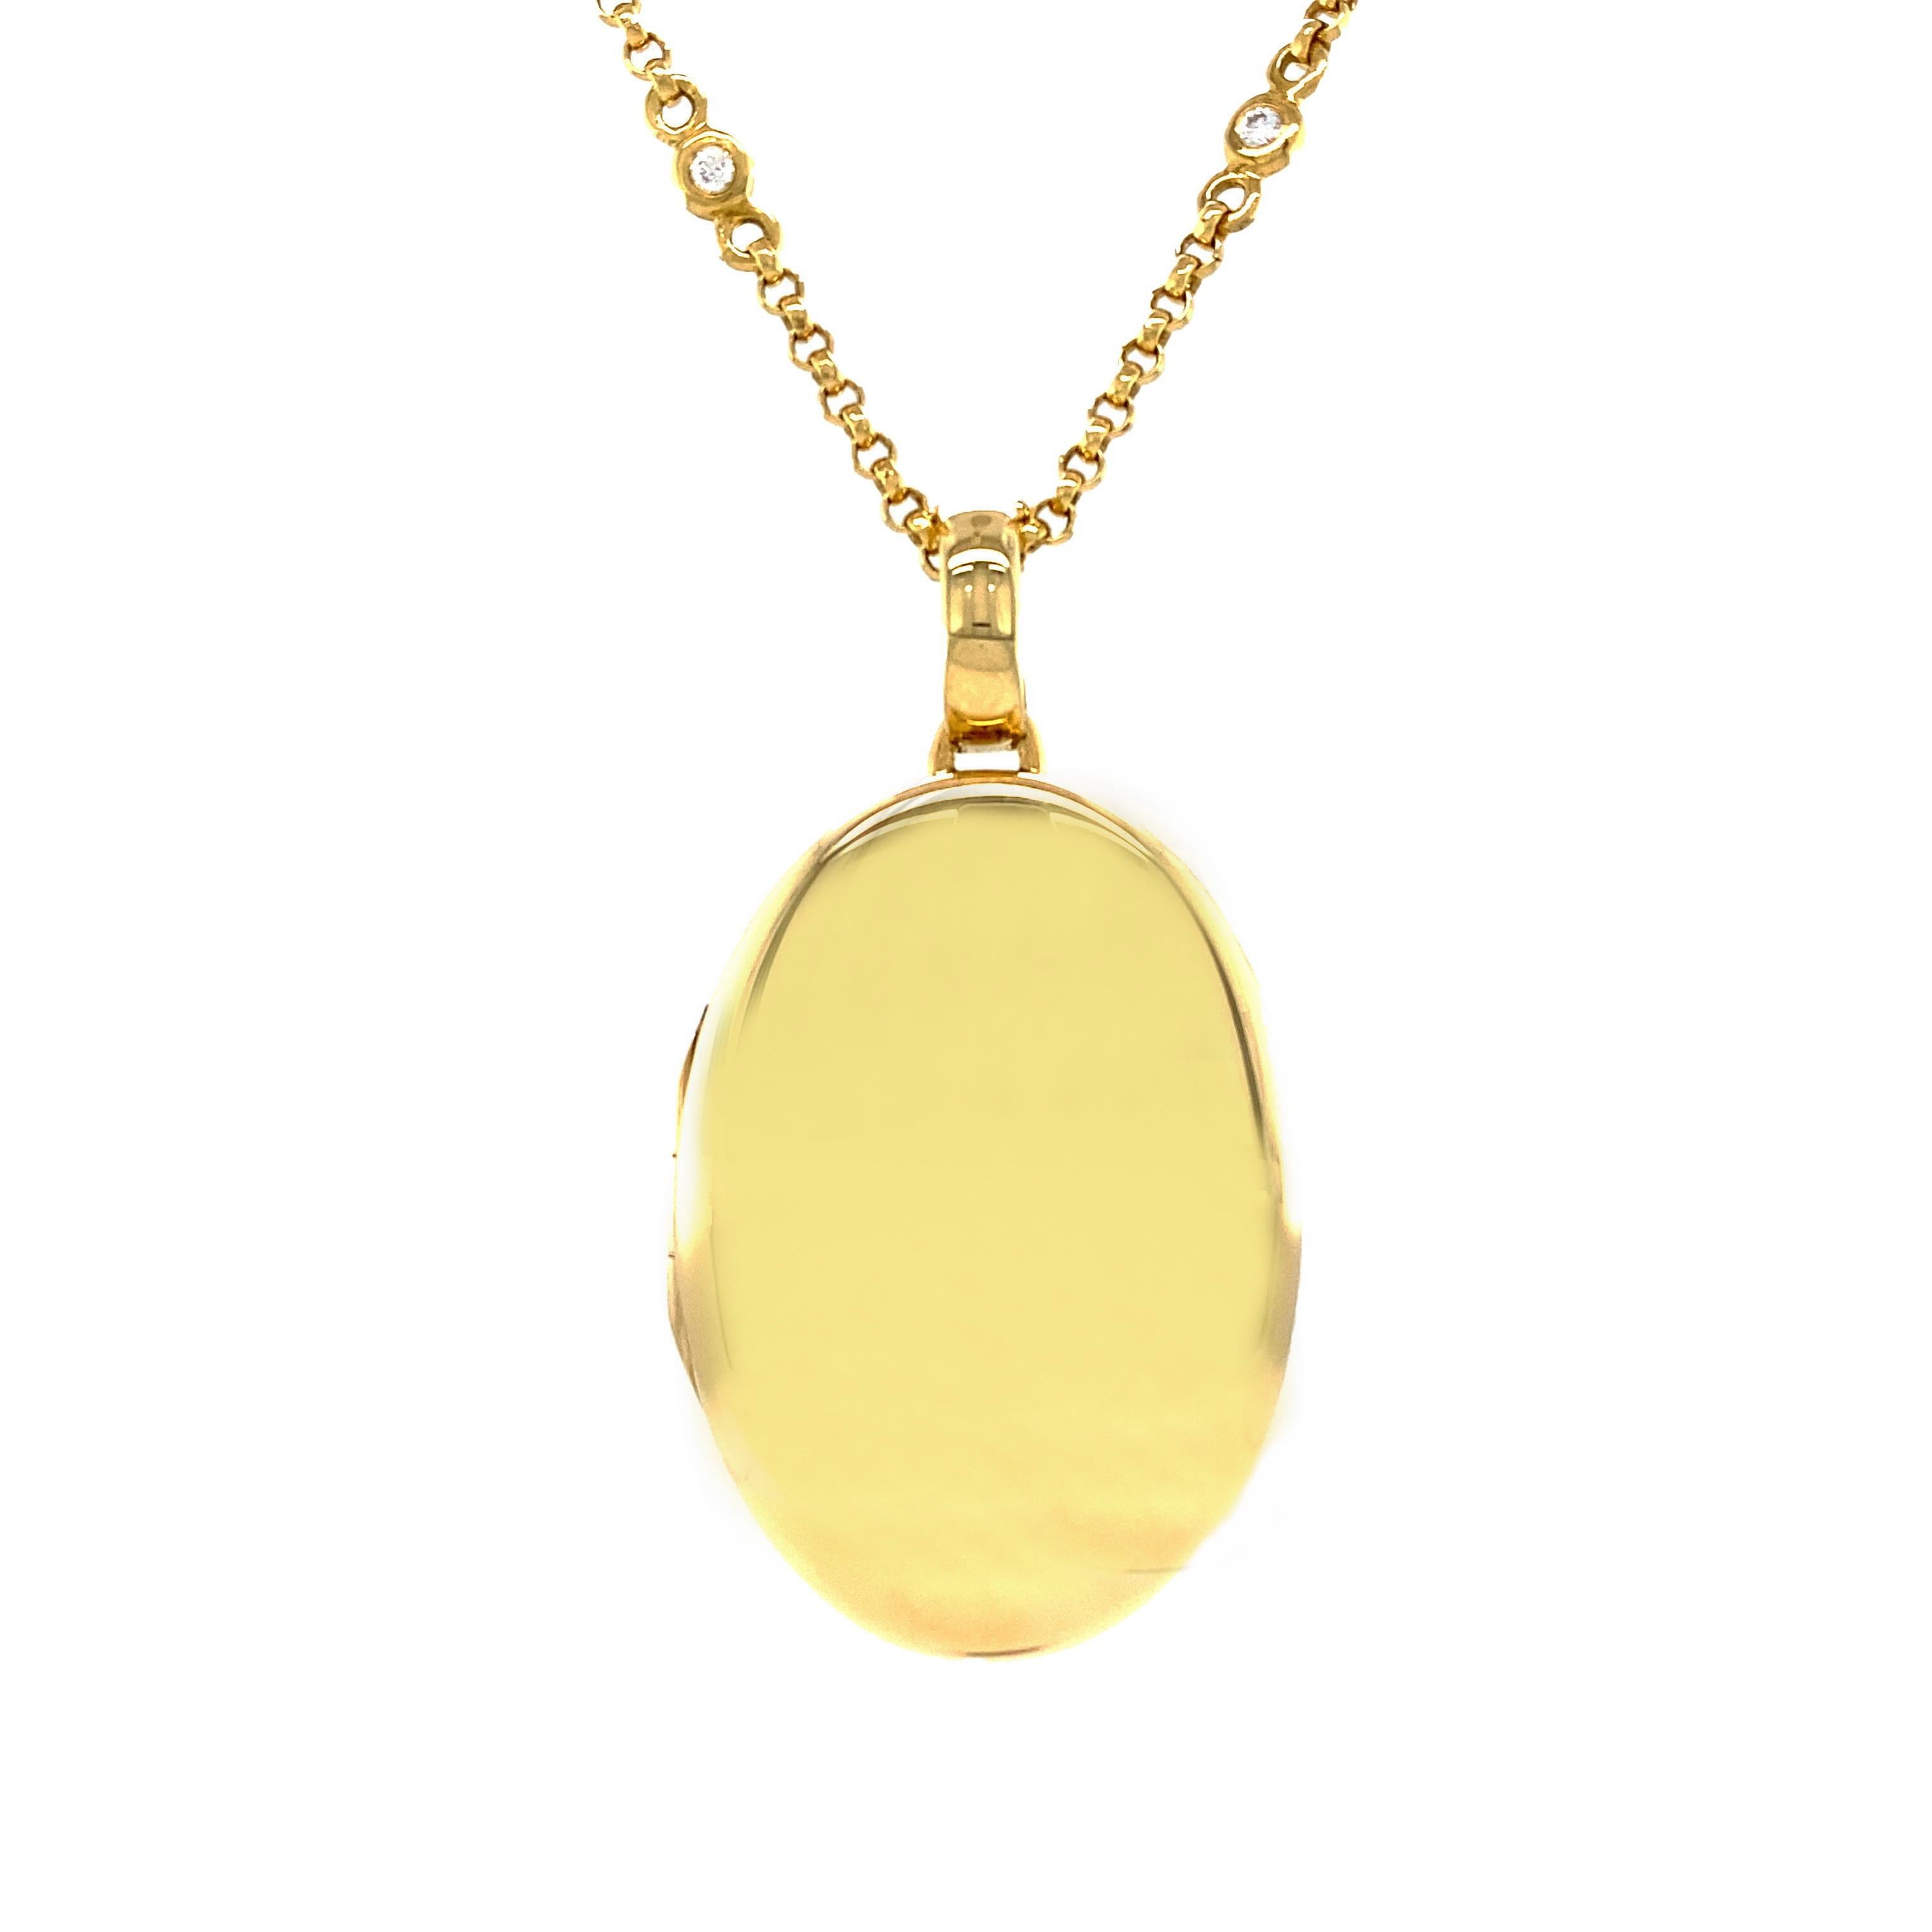 Customizable Oval Polished Pendant Locket - 18k Yellow Gold - 25.0 mm x 36.0 mm In New Condition For Sale In Pforzheim, DE